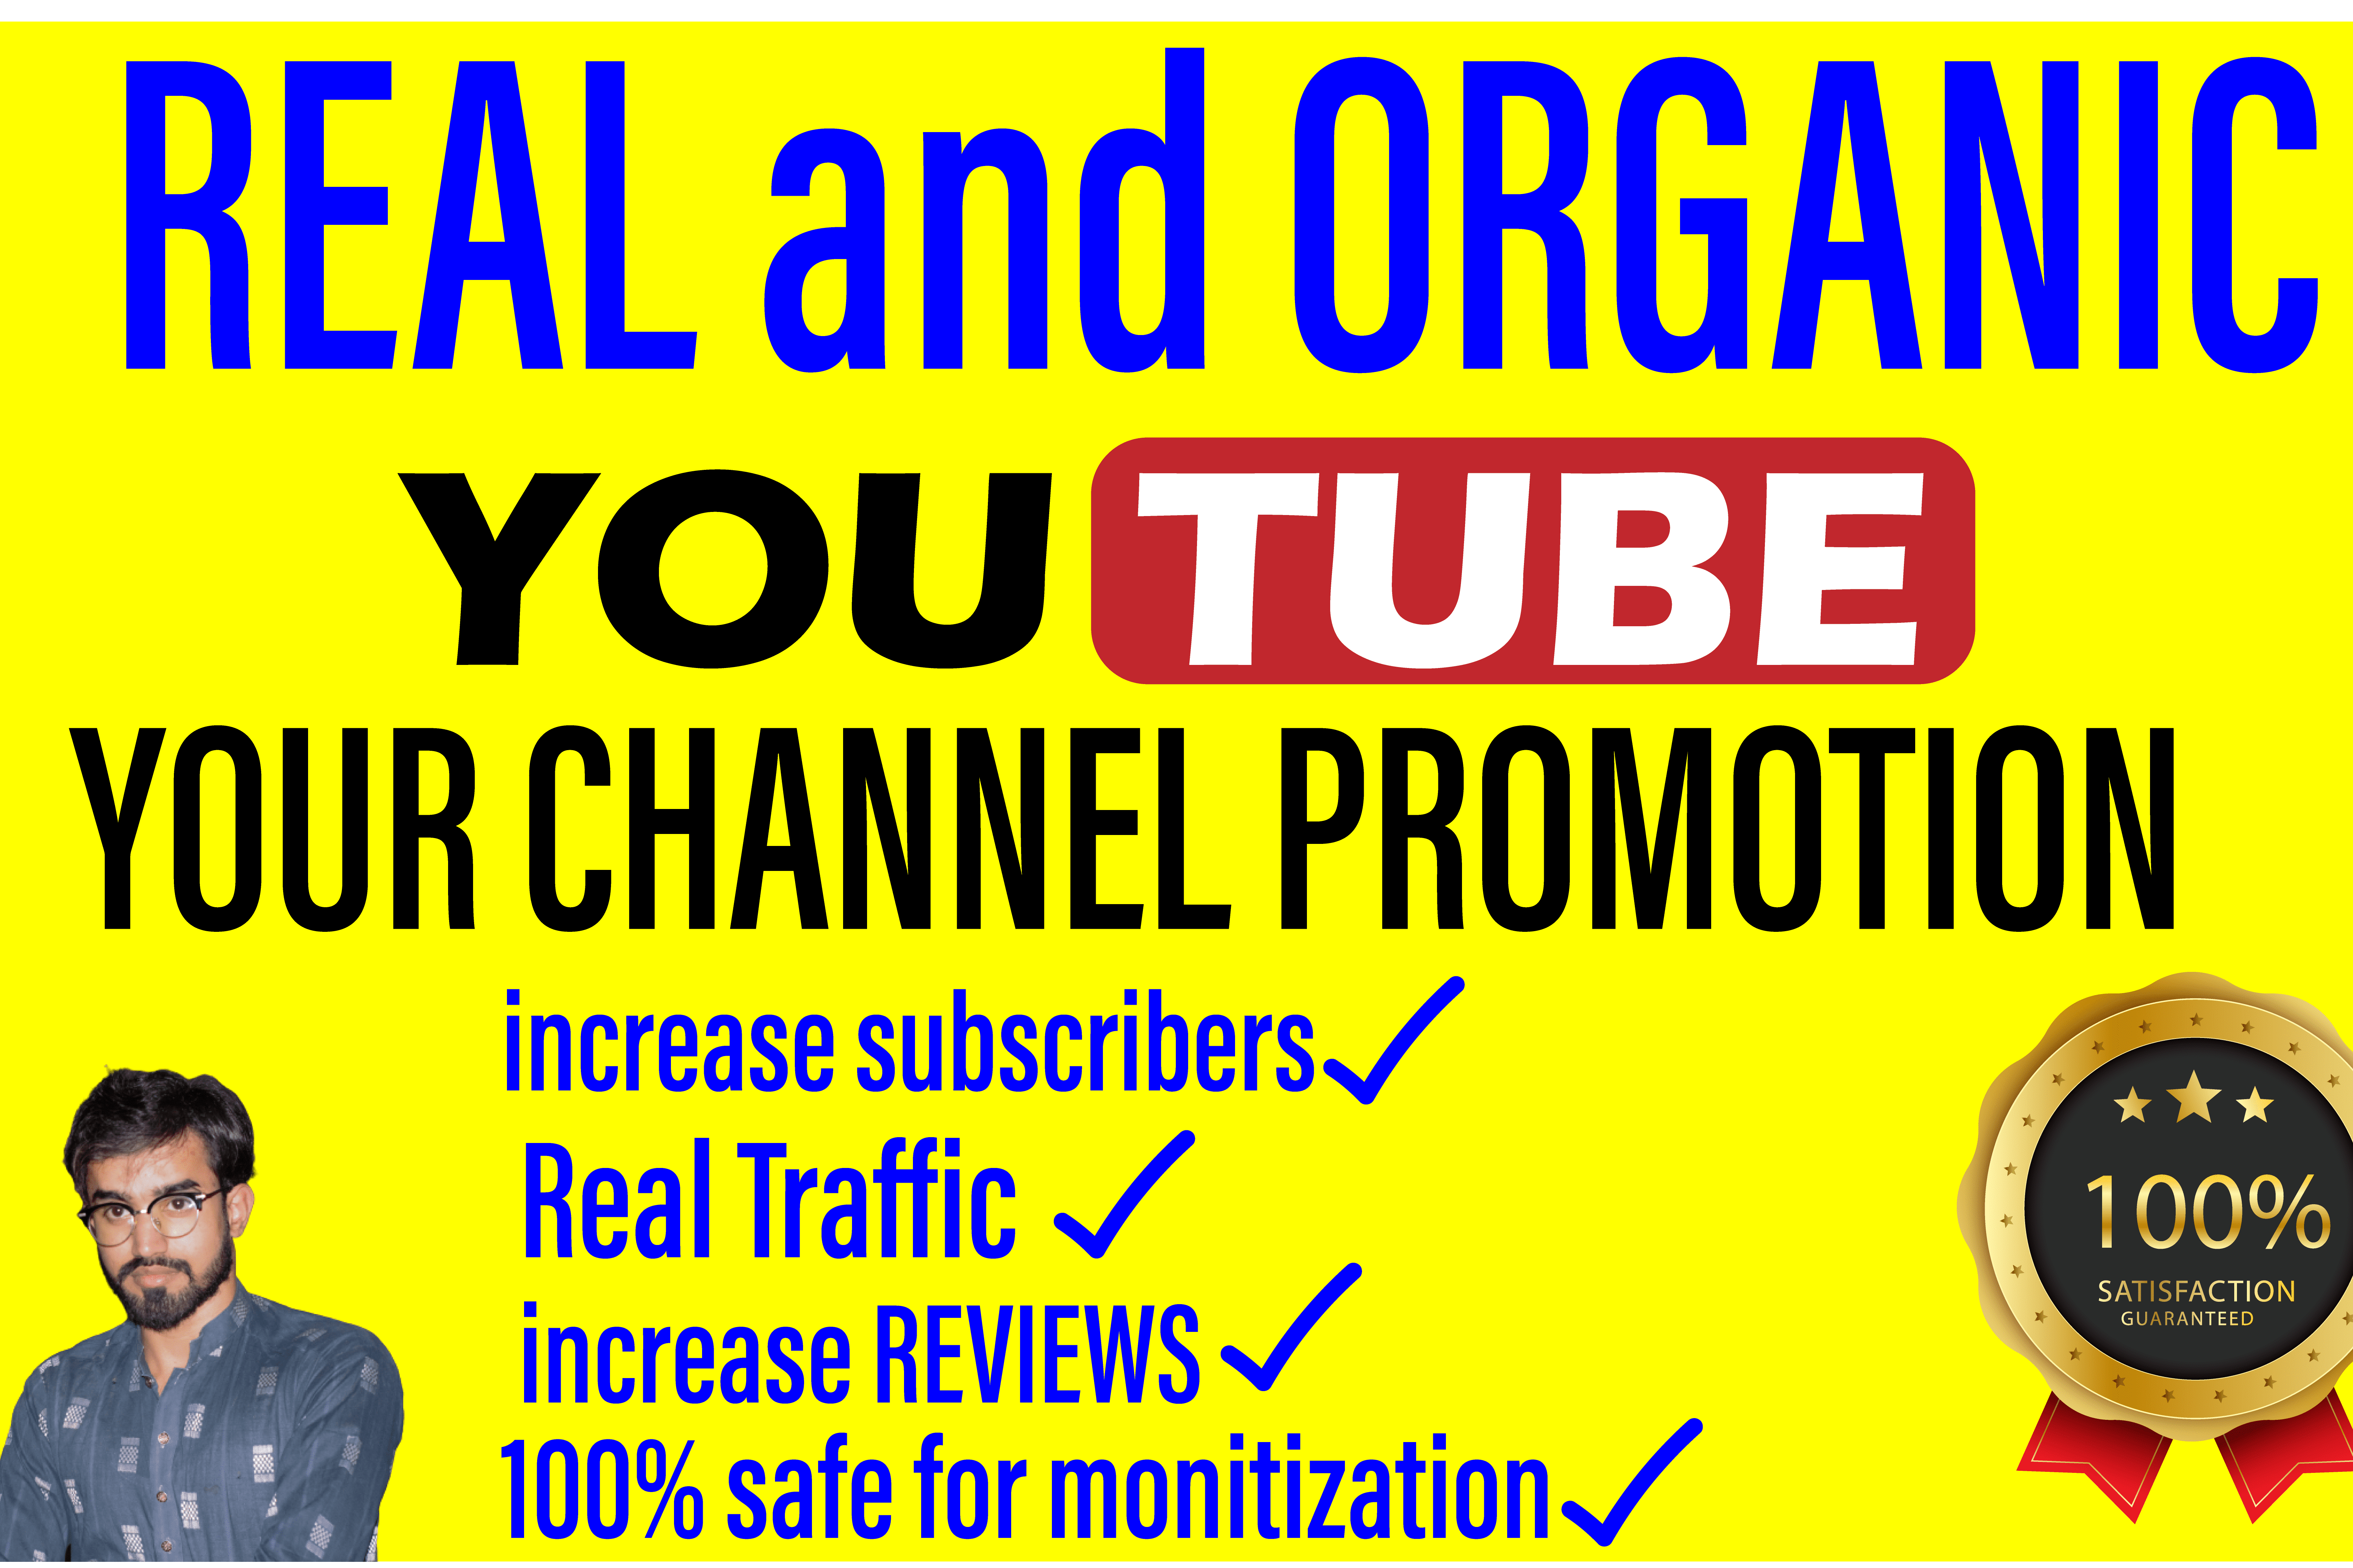 Portfolio for YouTube channel marketing and promotion